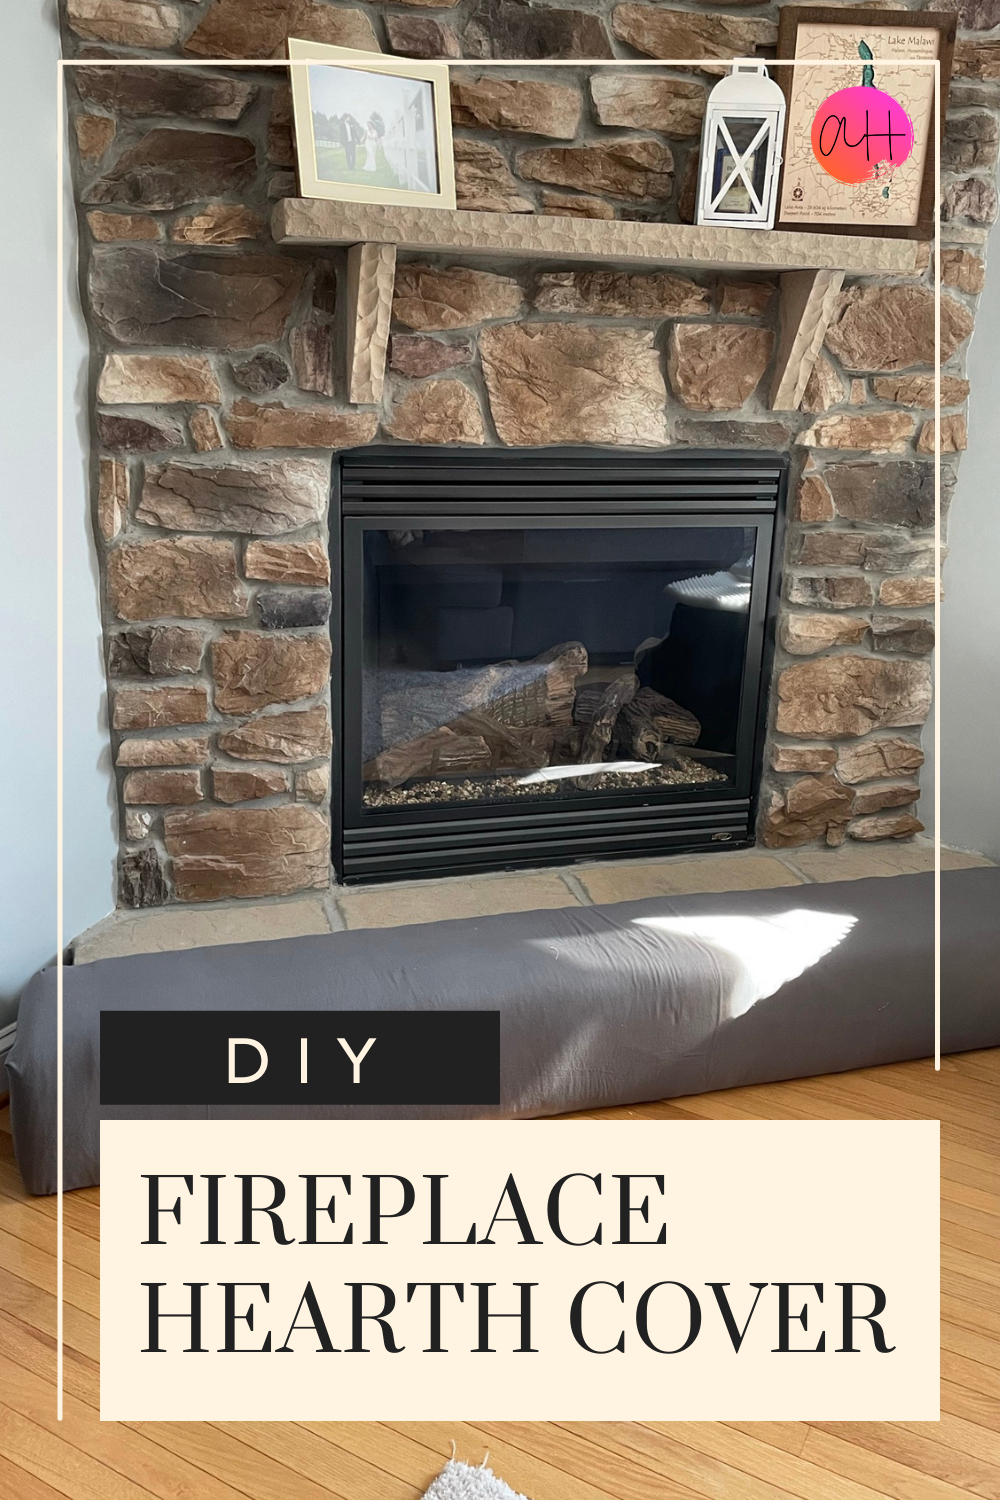 Babyproofing Our Fireplace - Welcome